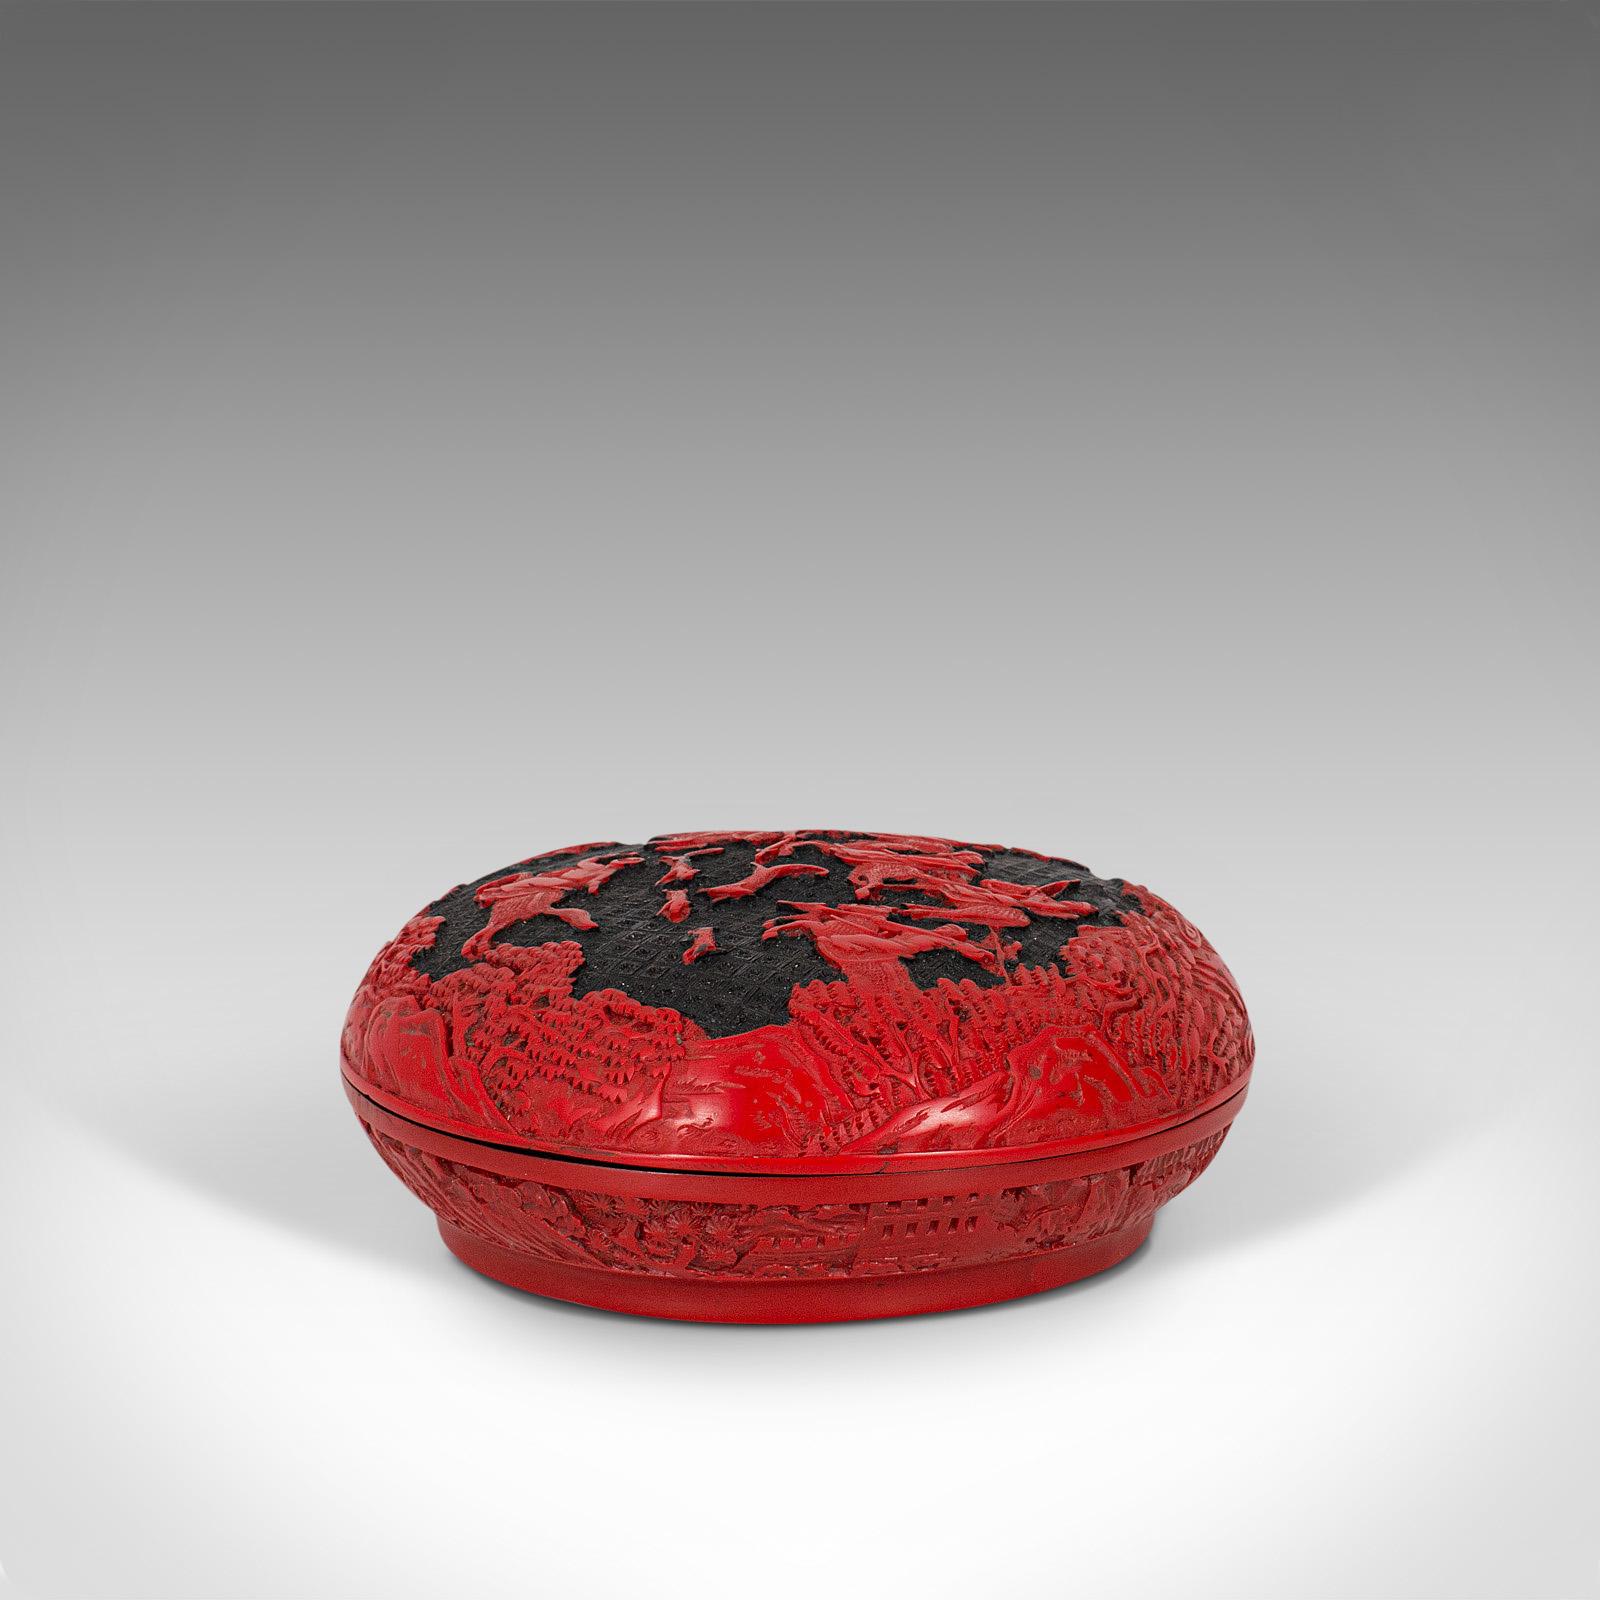 Other Antique Cinnabar Box, Chinese, Lacquer, Decorative Tray, Qing Dynasty circa 1900